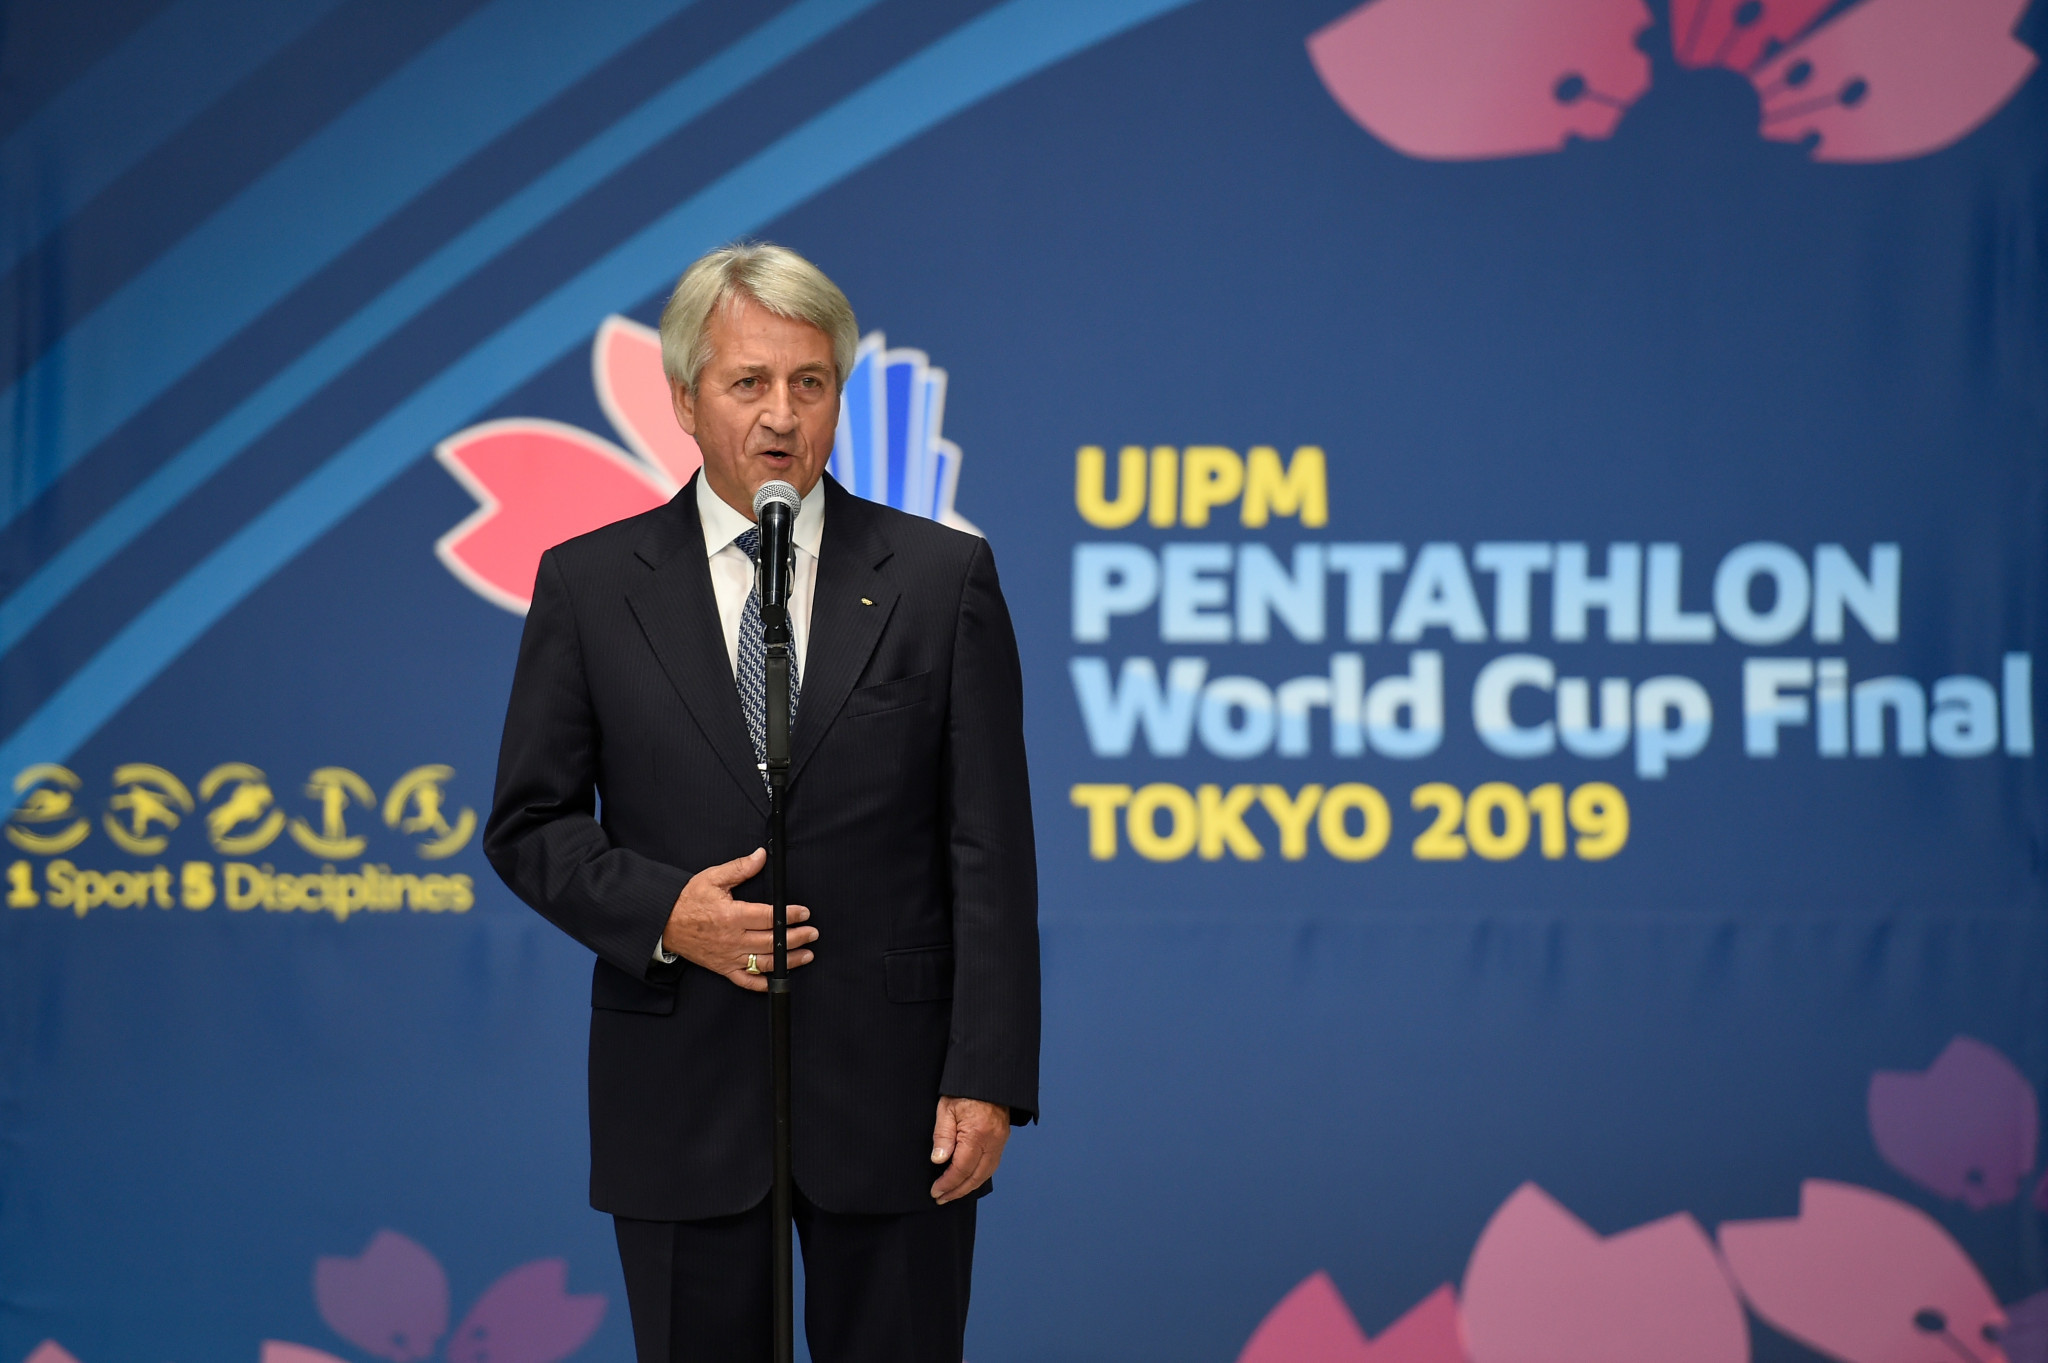 Concerns have been raised by the pressure group Pentathlon United over the UIPM's governance under long-serving President Klaus Schormann ©Getty Images